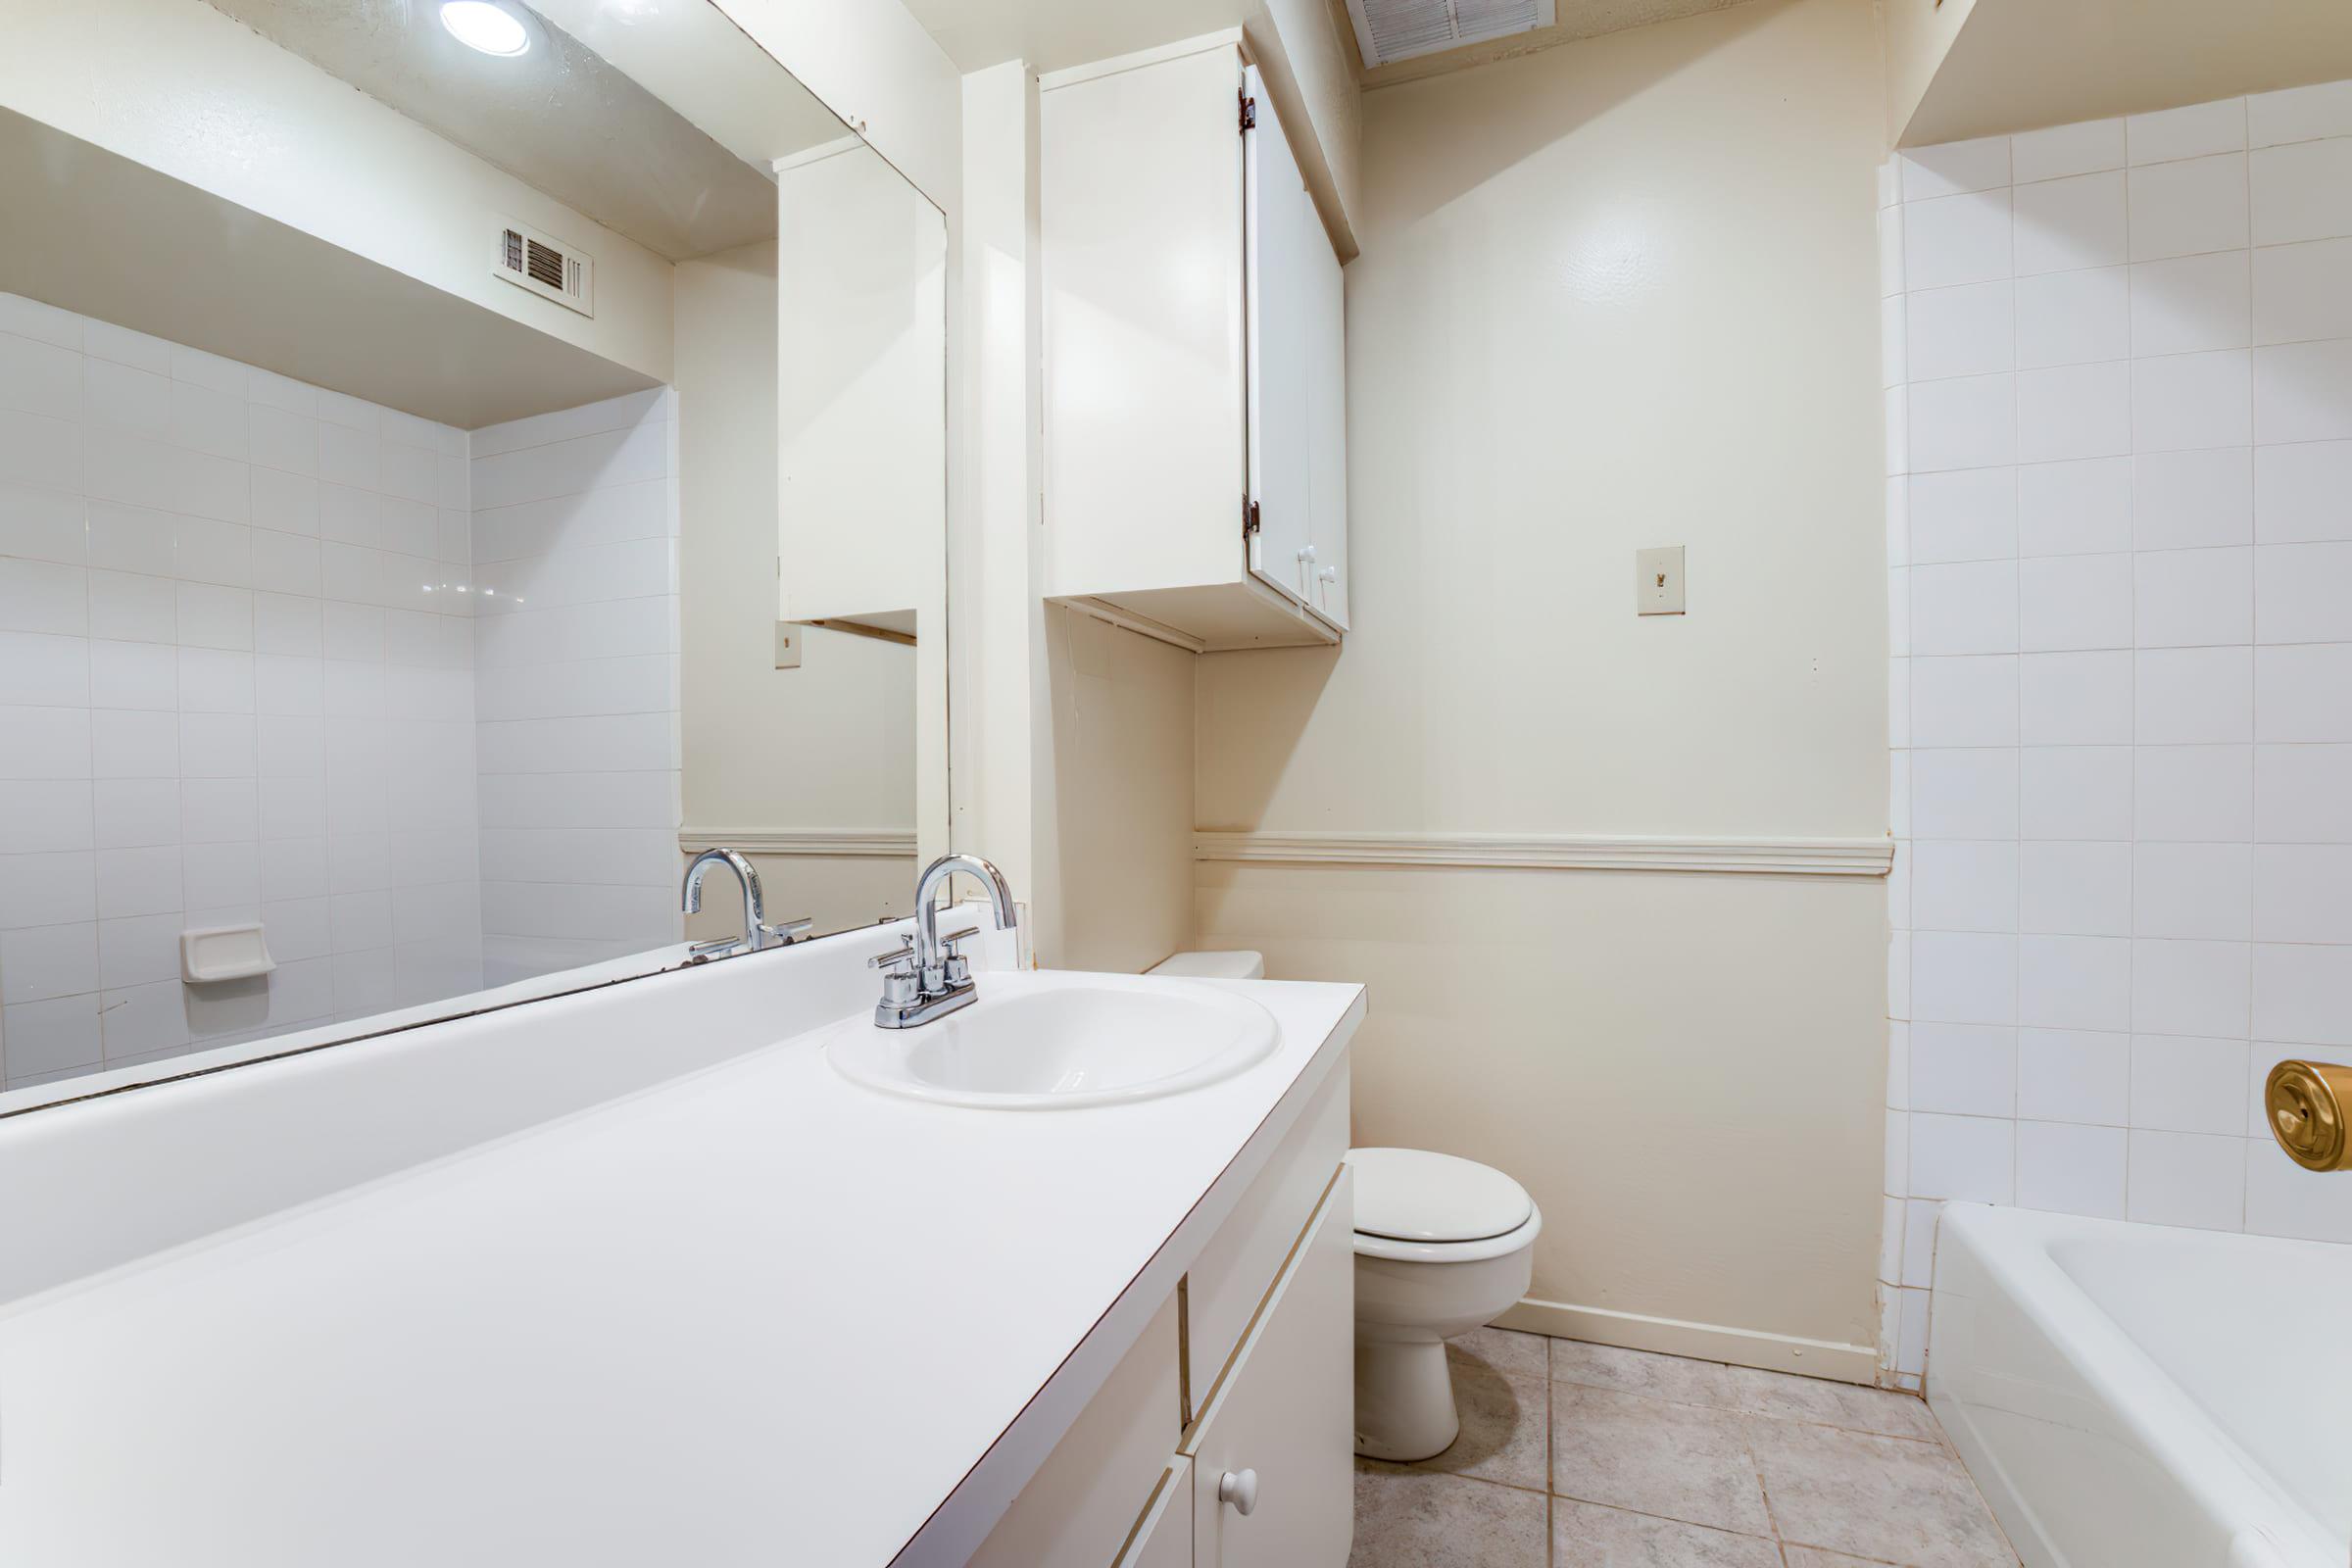 vacant bathroom with white countertops